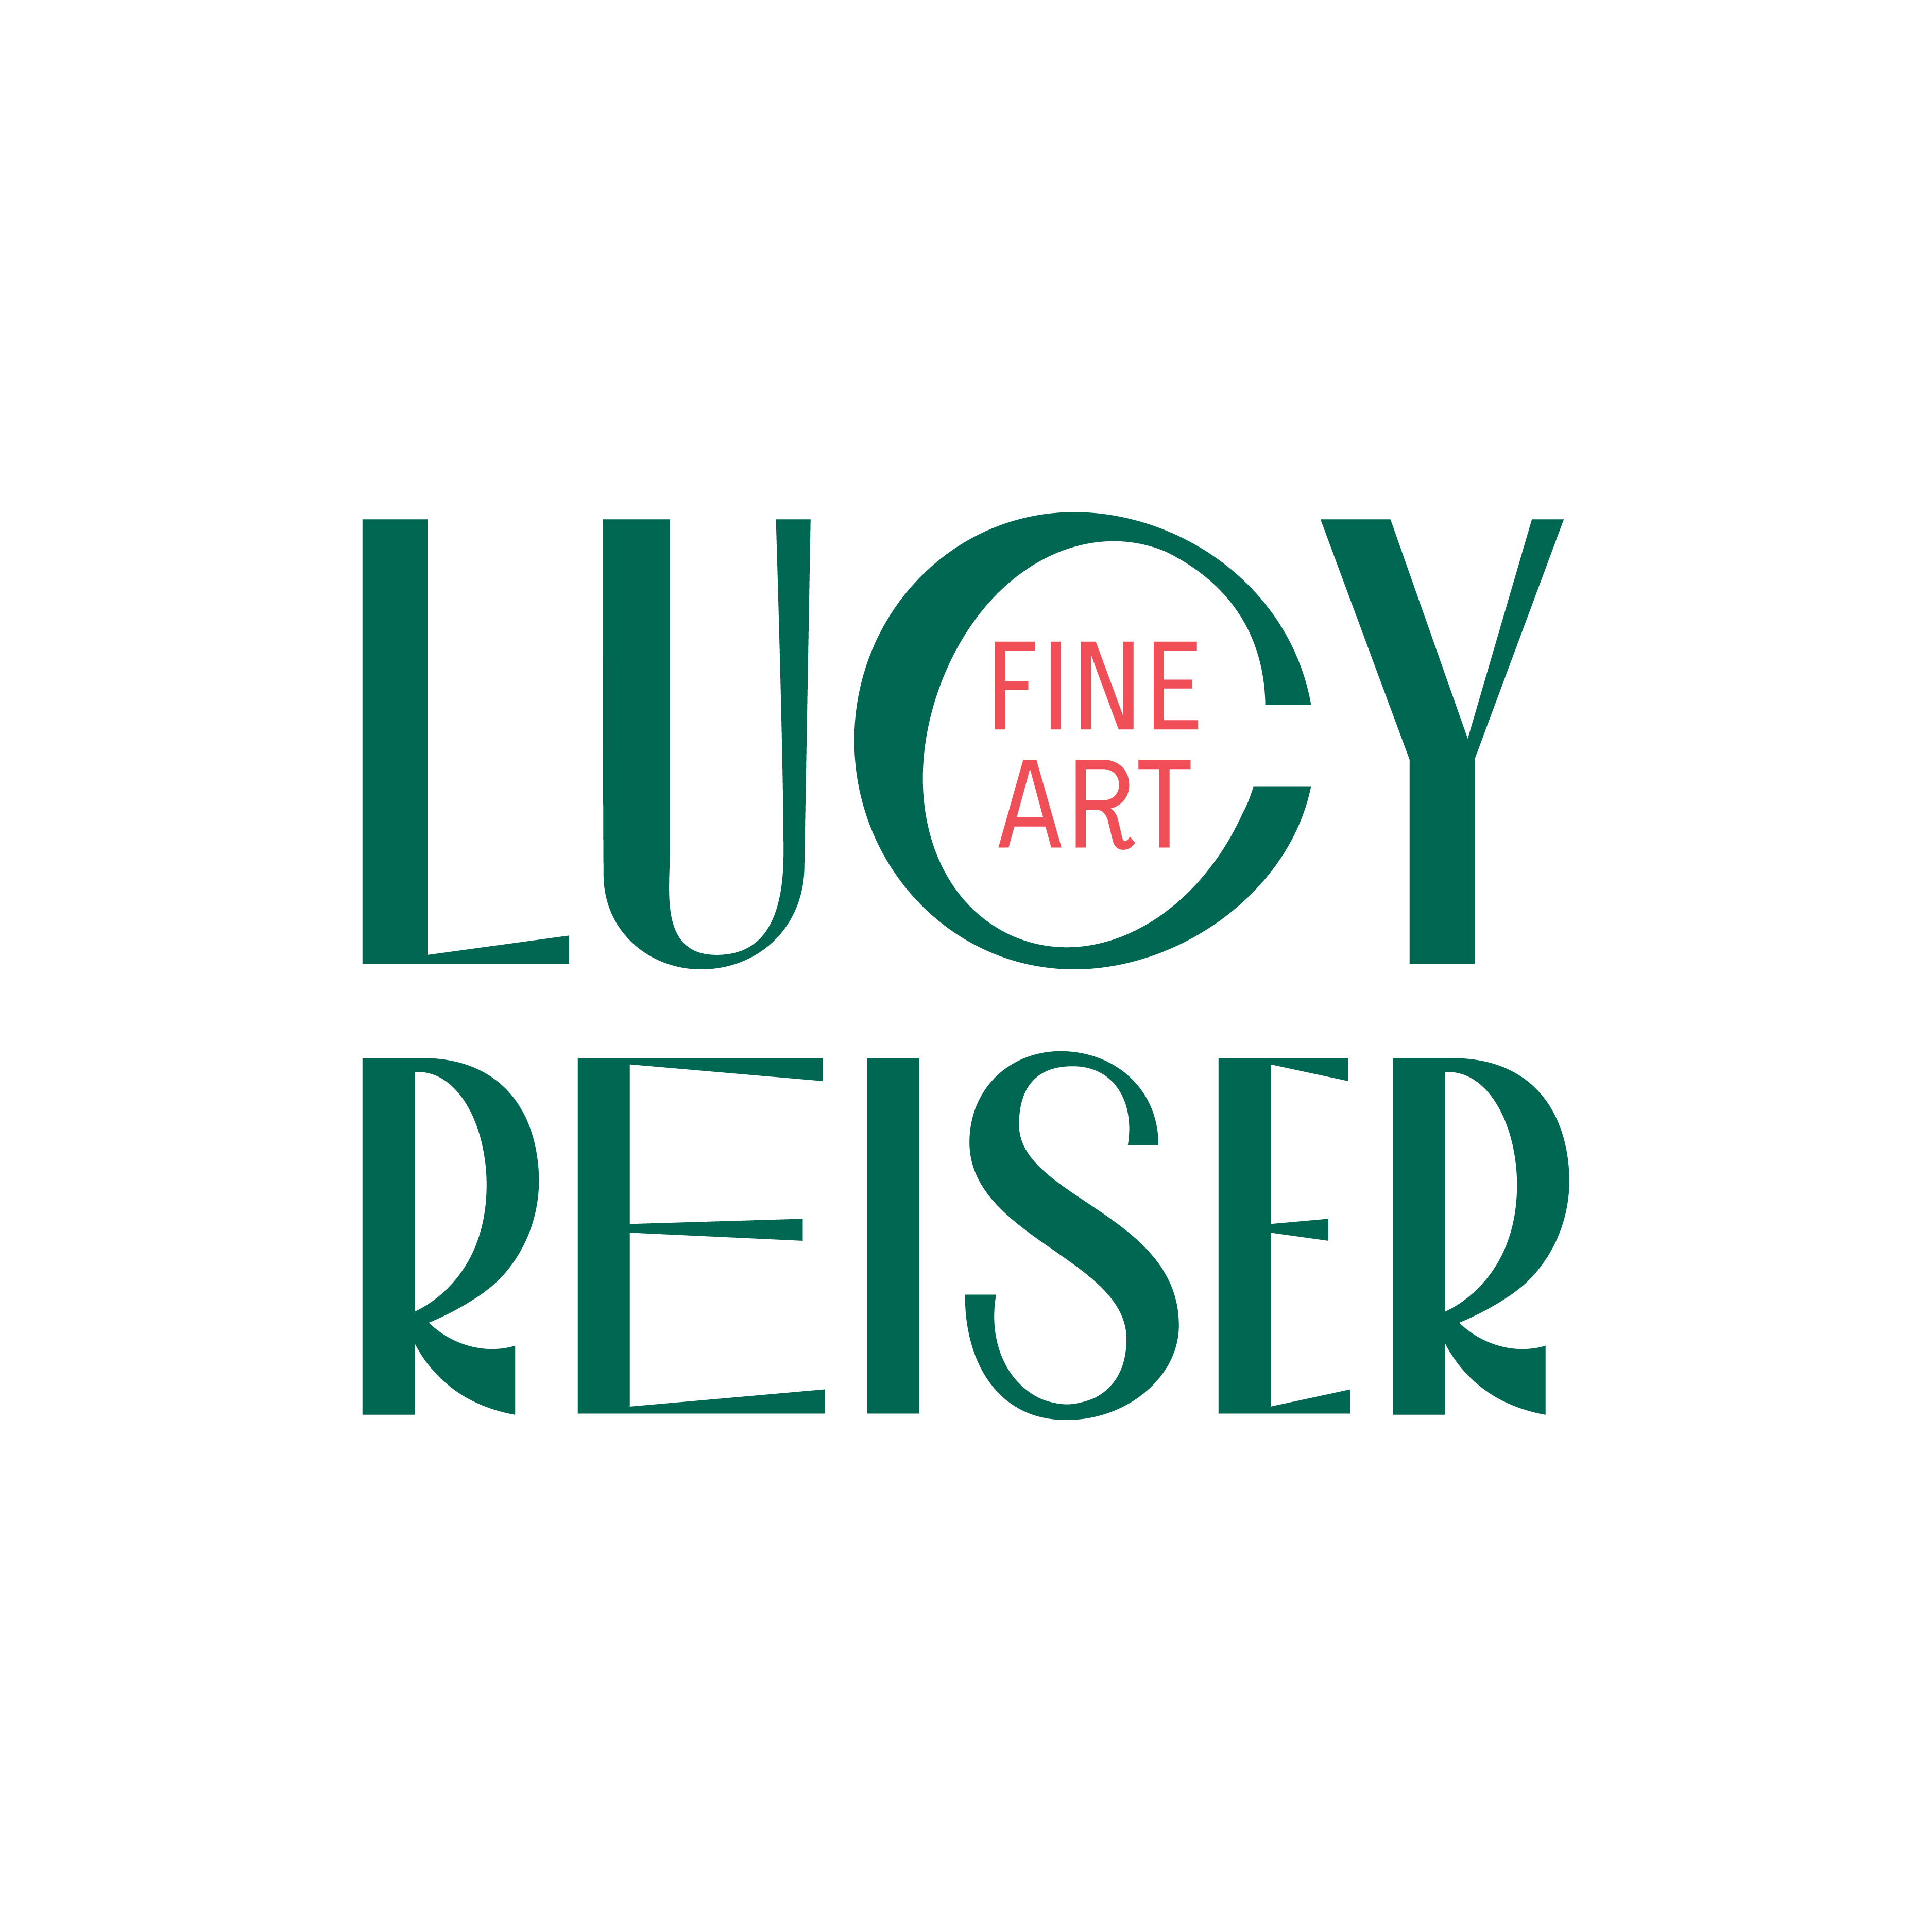 Lucy Reiser Fine Art Logo Concept logo design by logo designer Taylor Sutherland Design Co for your inspiration and for the worlds largest logo competition